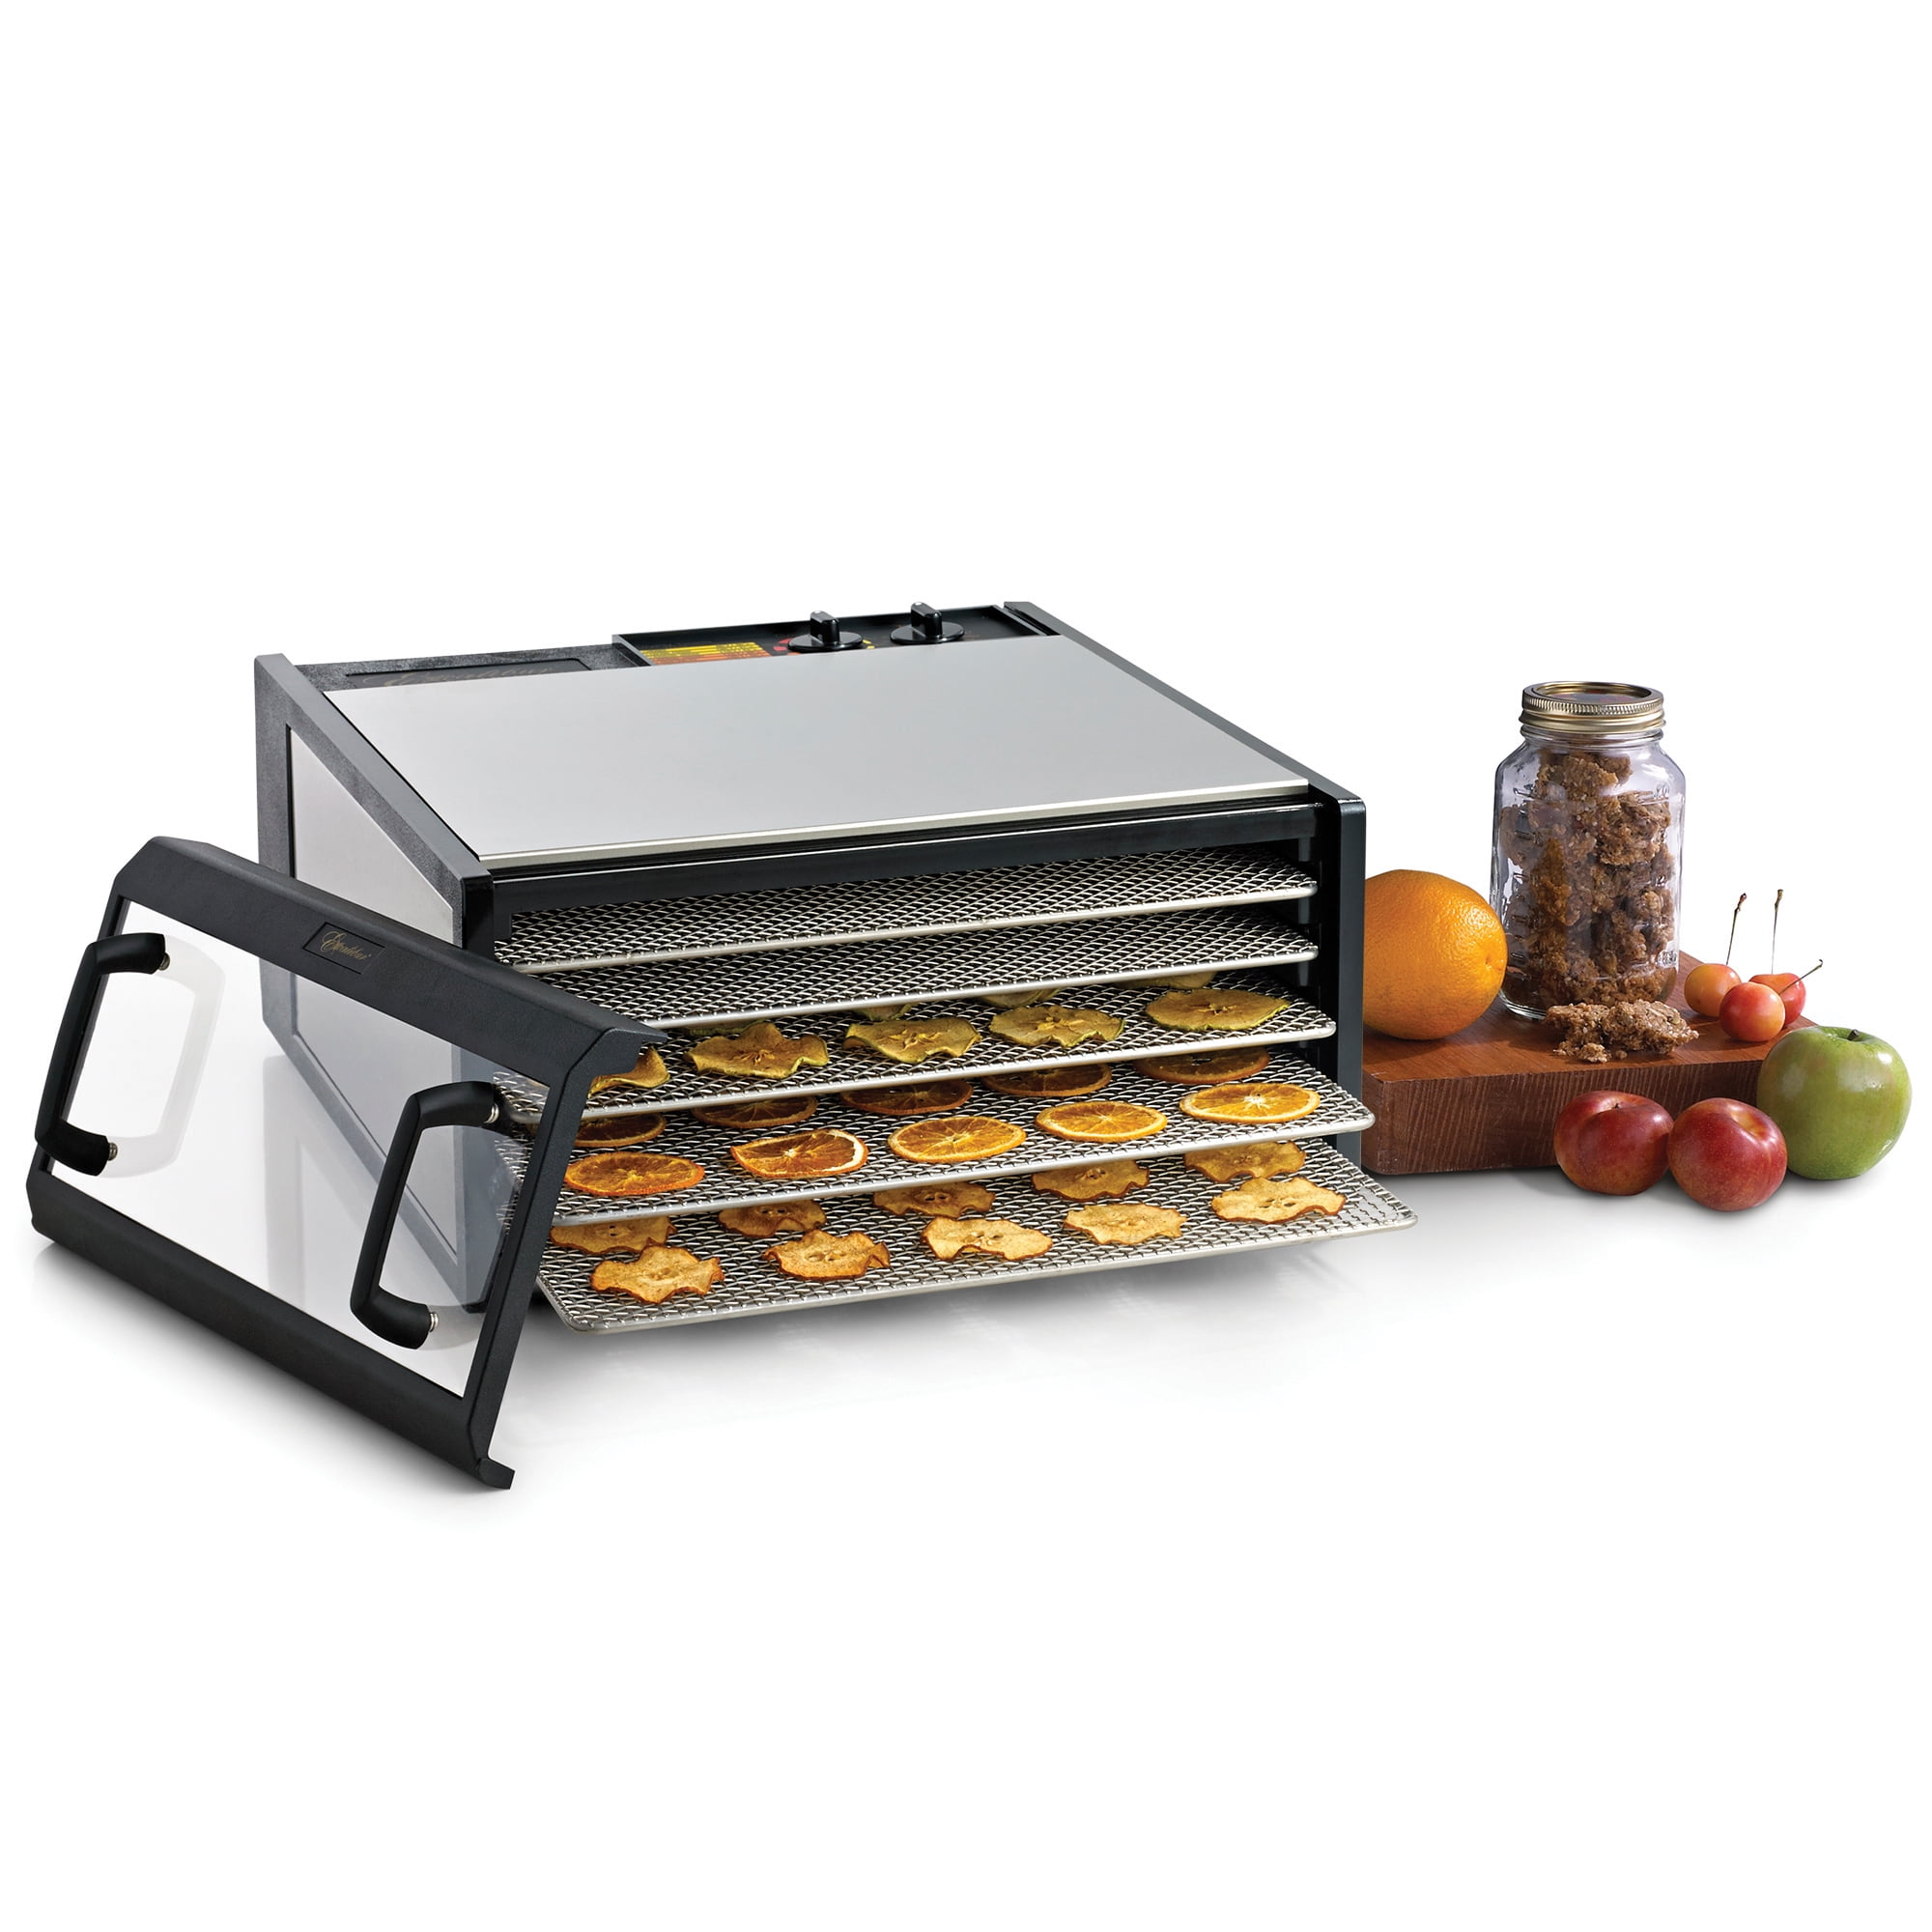 Excalibur D500CDSHD 5-Tray Electric Food Dehydrator with Clear Door for Viewing Progress Features Timer Temperature Settings and Off - Walmart.com